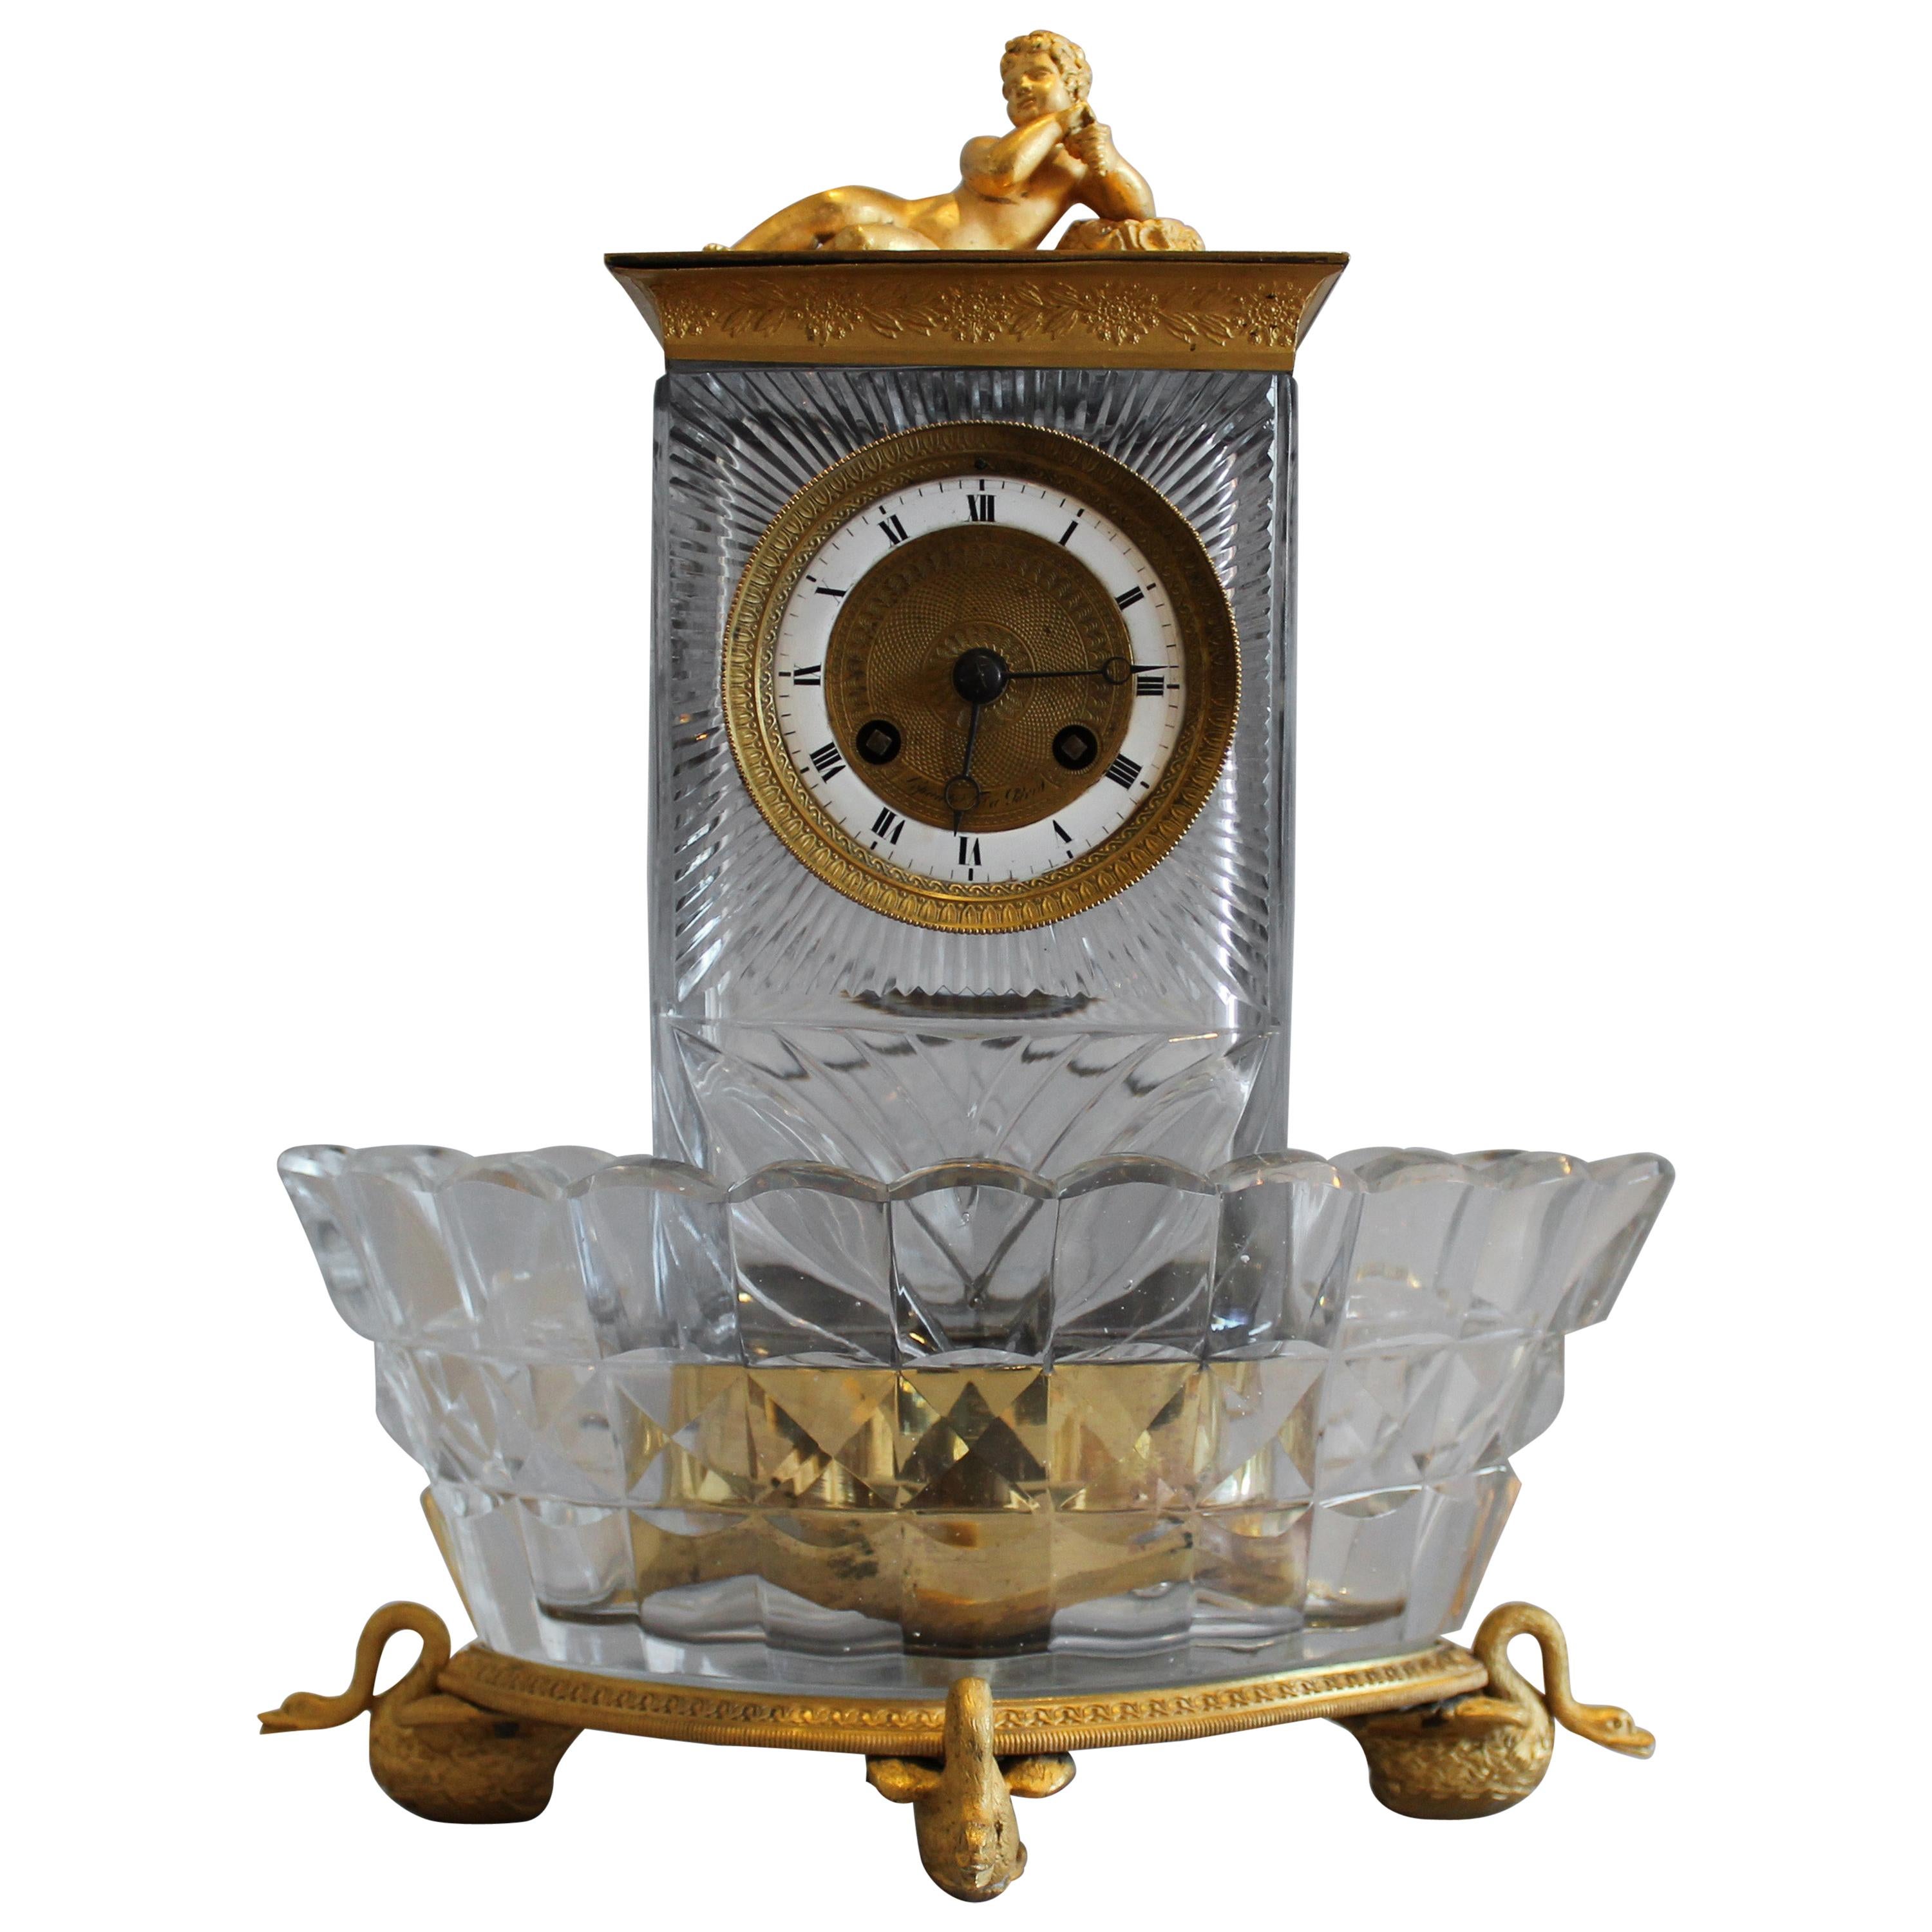 French Charles X Crystal and Ormolu Mantel Clock Signed Lepine et Cie a Paris